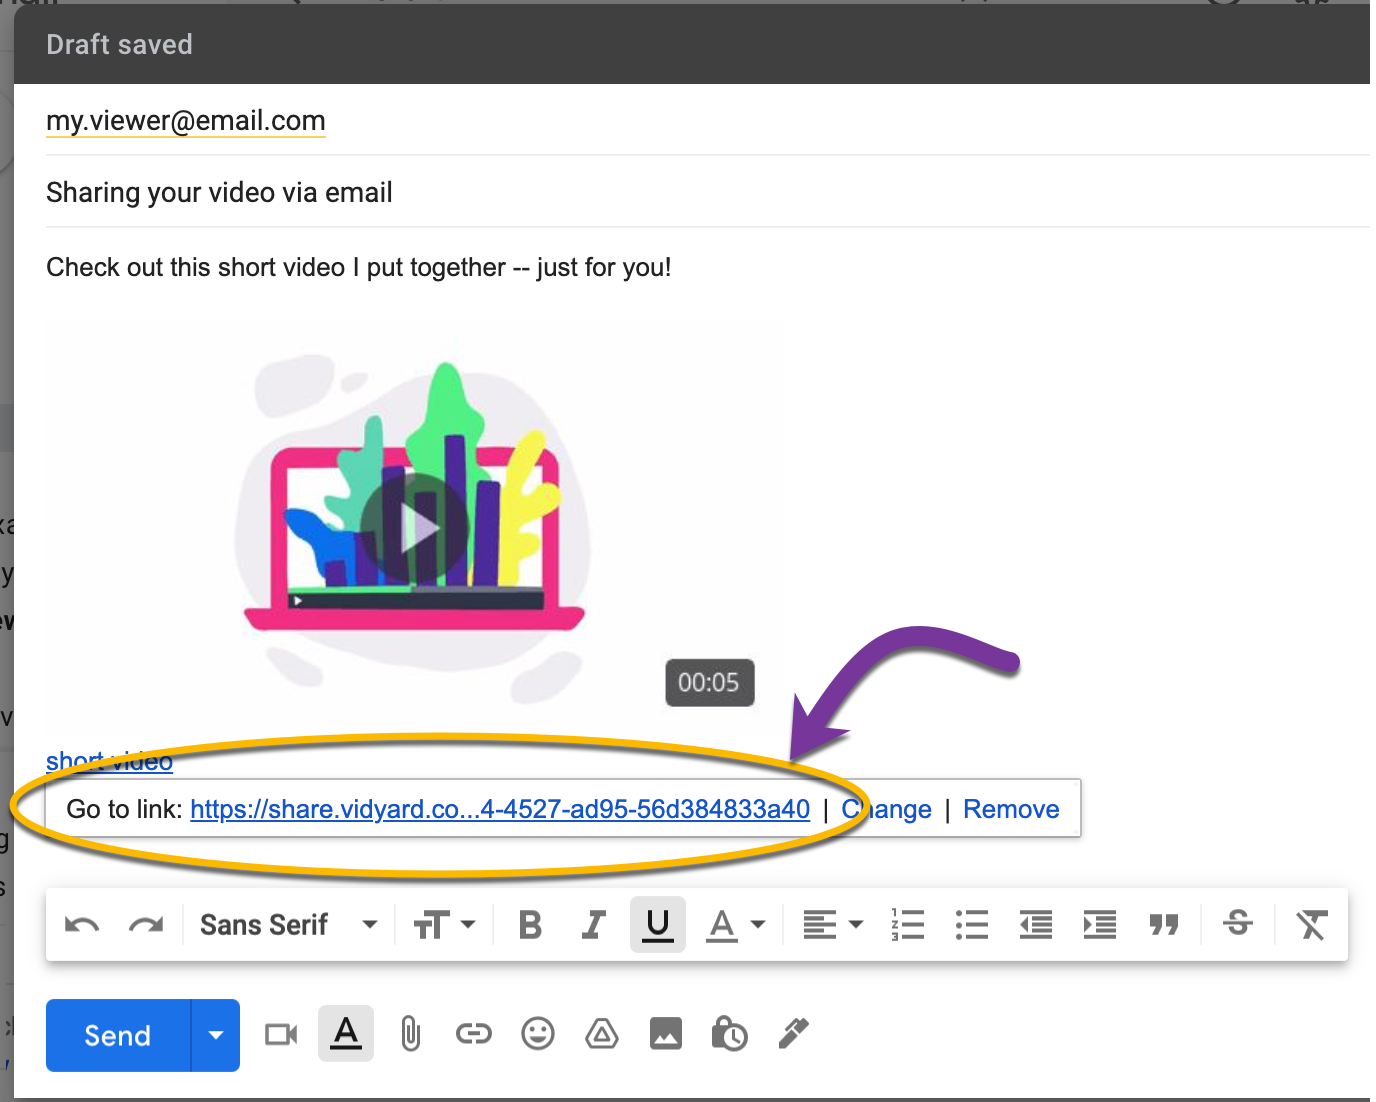 Your video when added to an email, highlighting how you can see the tracking token appending to the sharing link URL